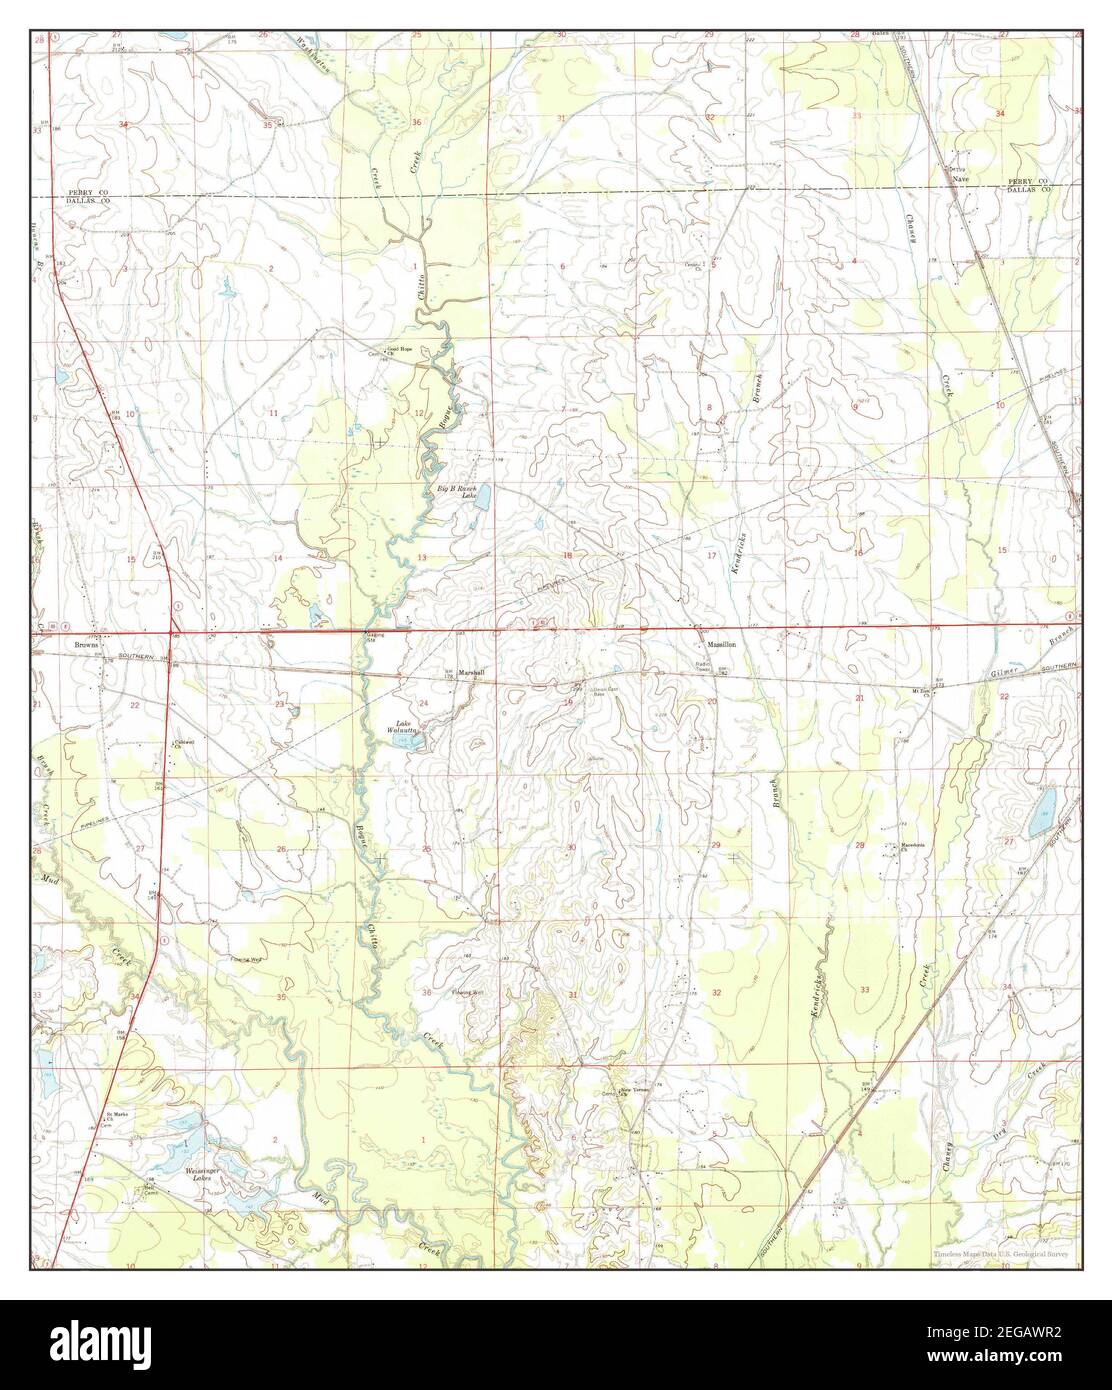 Browns, Alabama, map 1968, 1:24000, United States of America by Timeless Maps, data U.S. Geological Survey Stock Photo